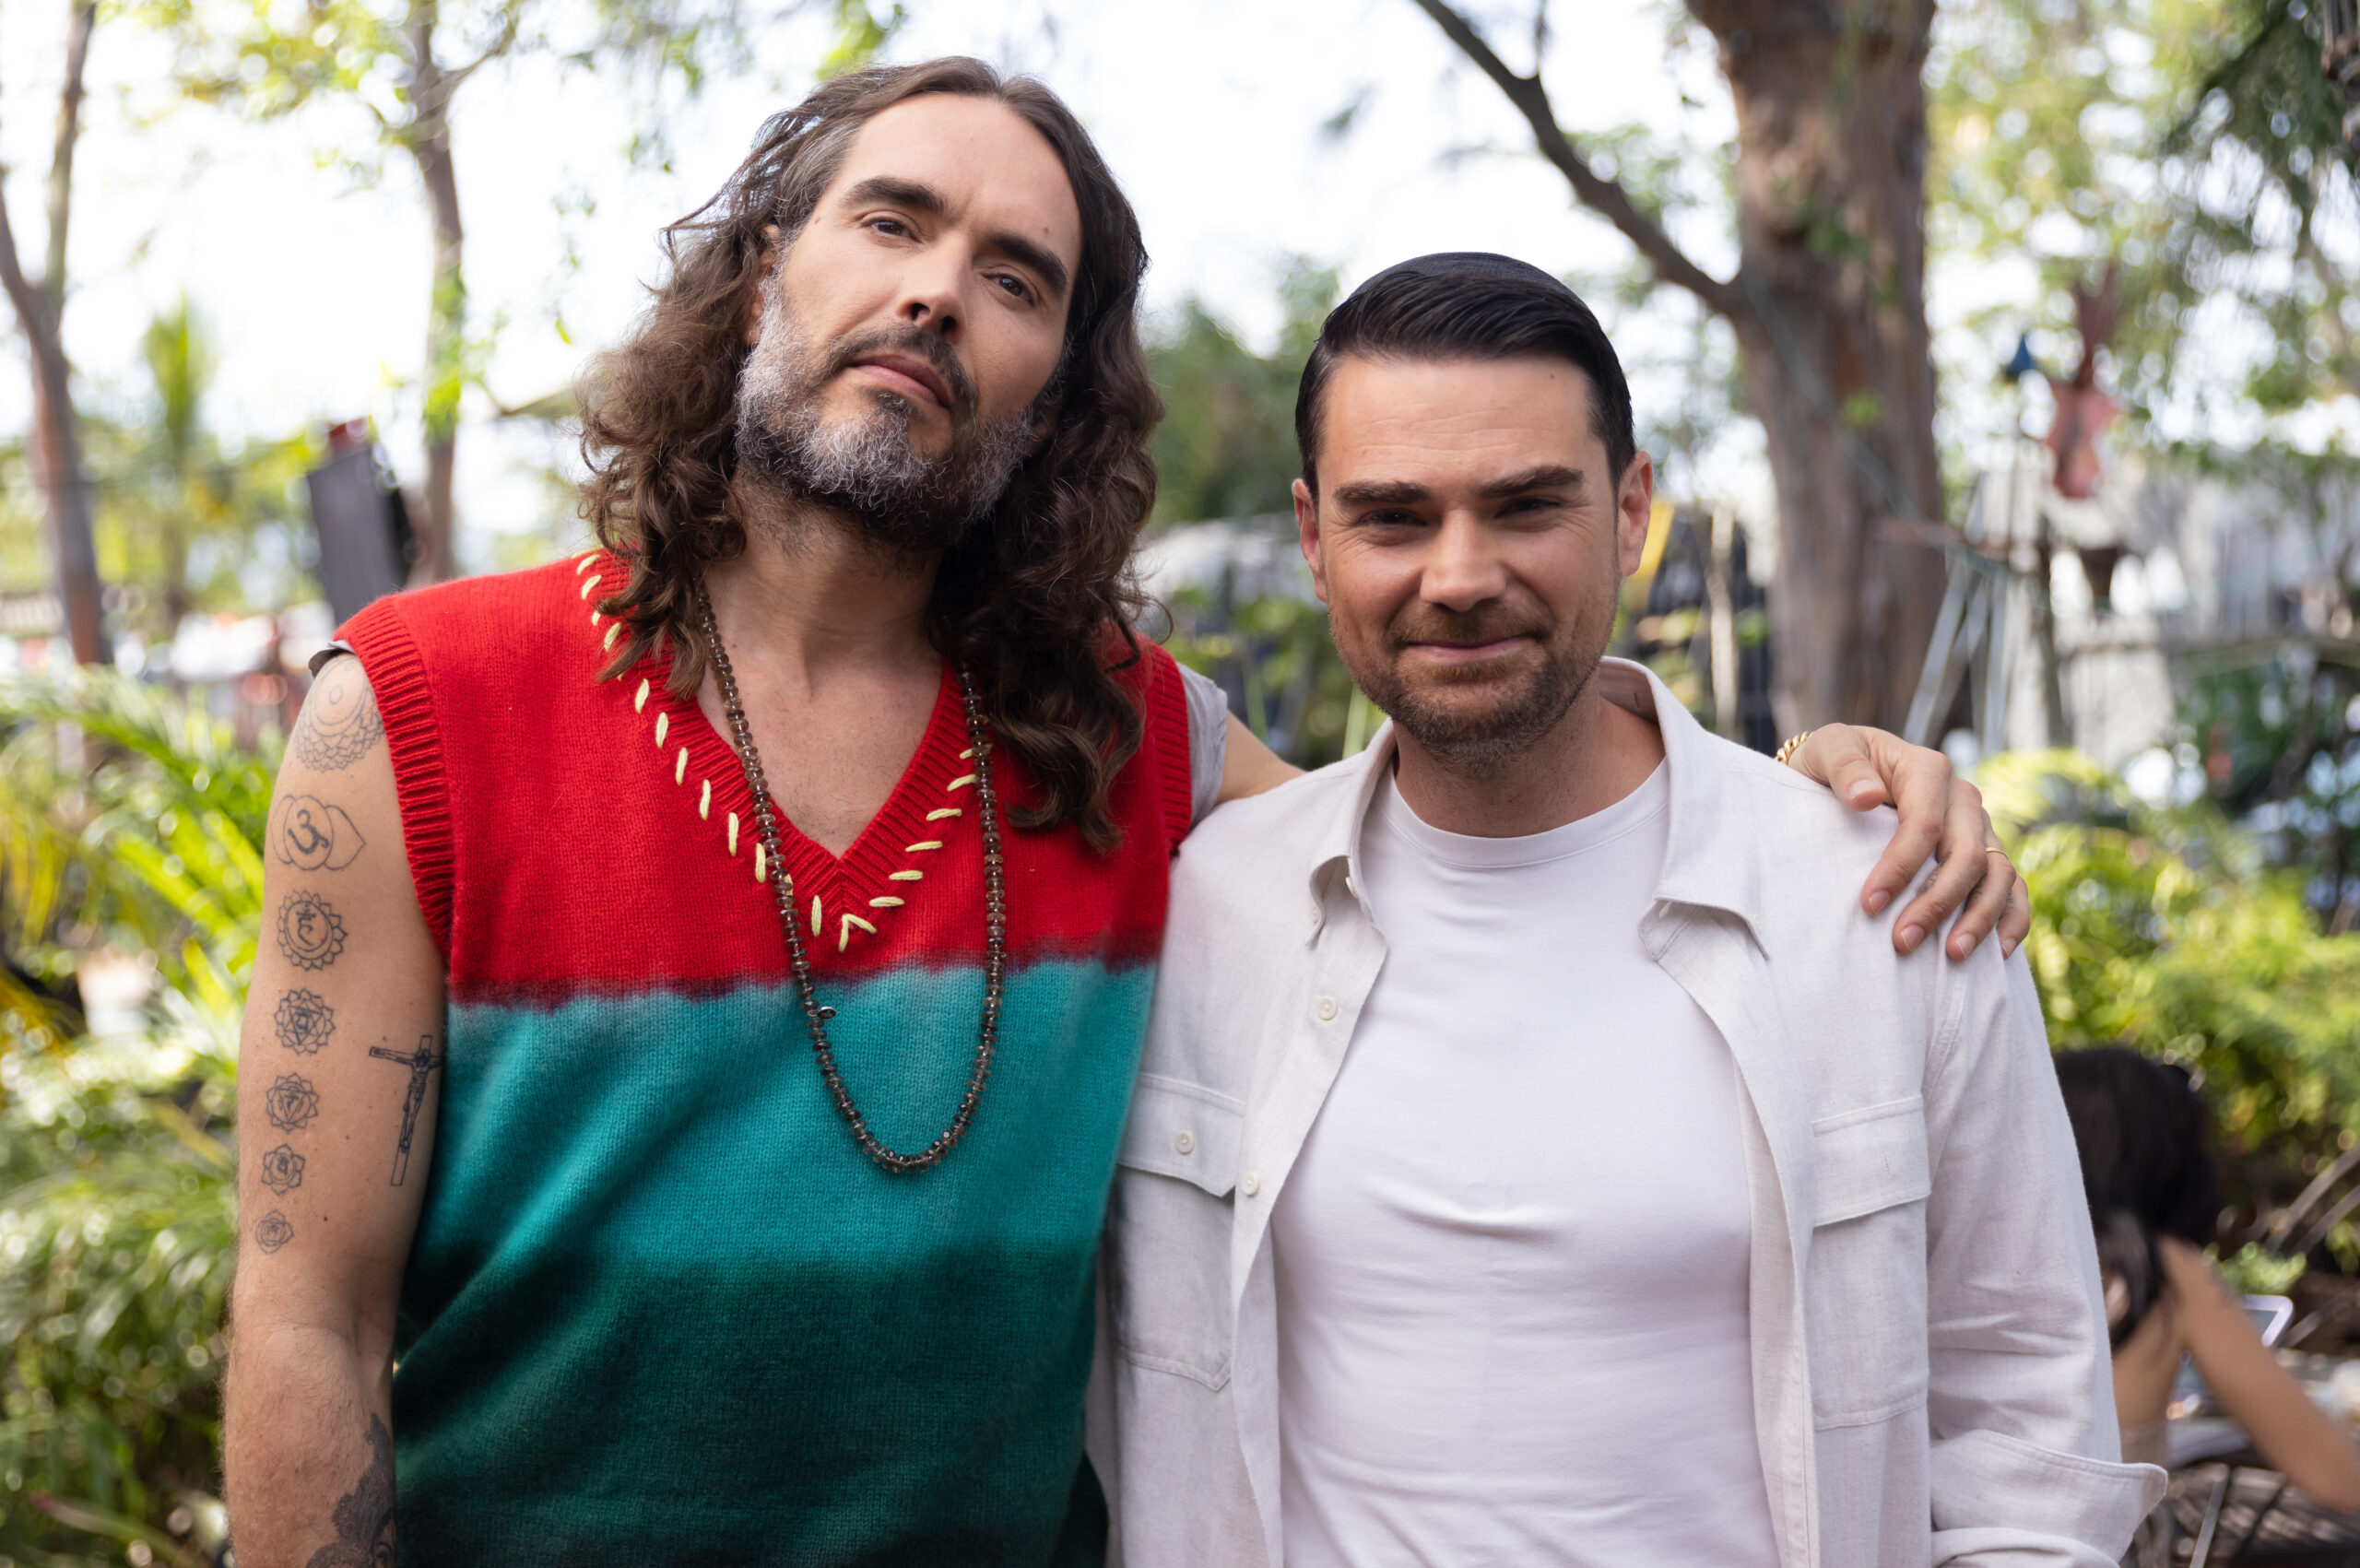 In the latest episode of 'The Search', Russell Brand and Ben Shapiro discussed parenting, marijuana, and politics